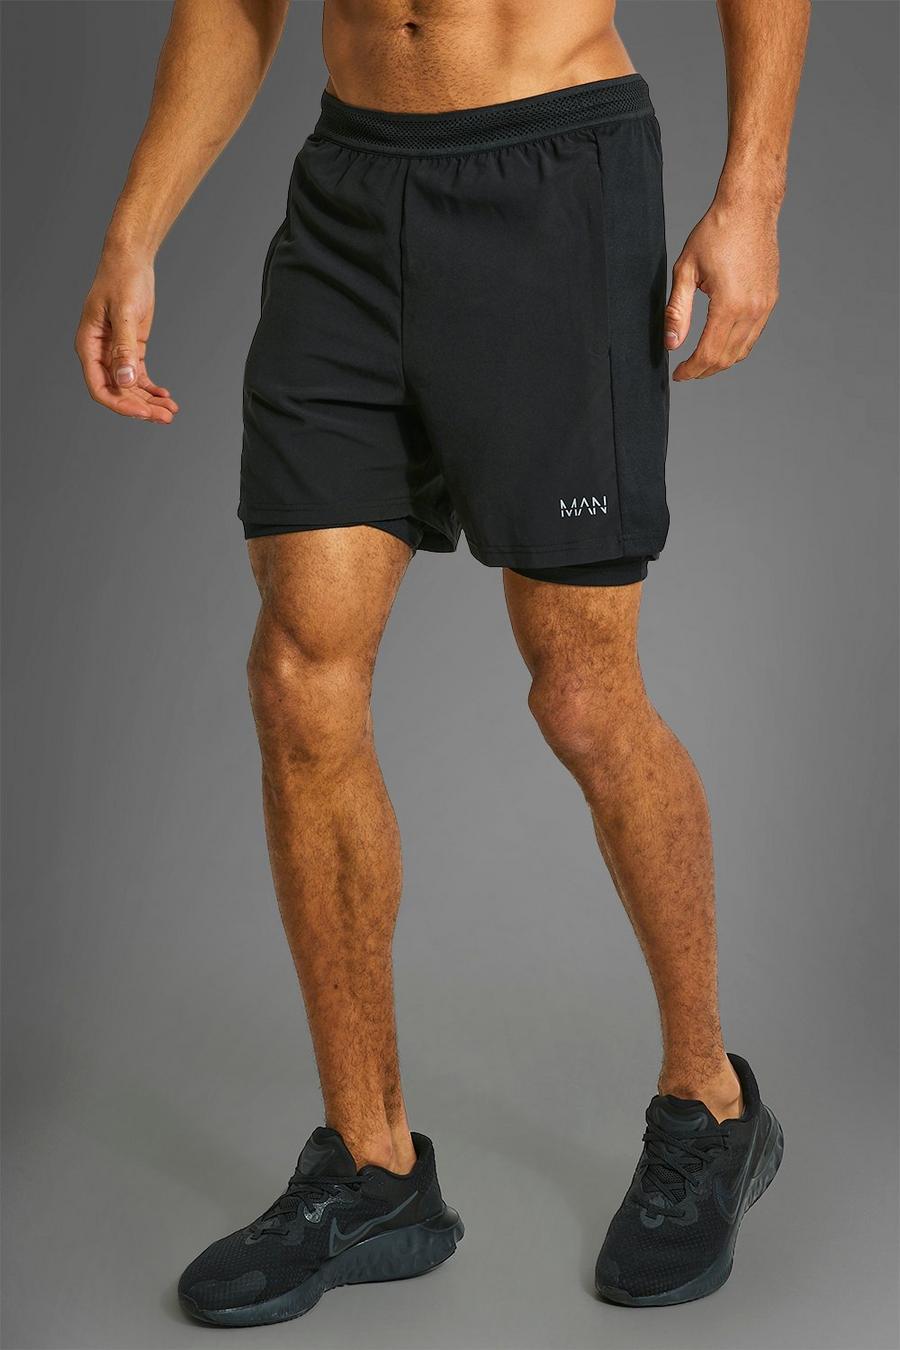 Man Active Performance 2-in-1 Shorts, Black image number 1